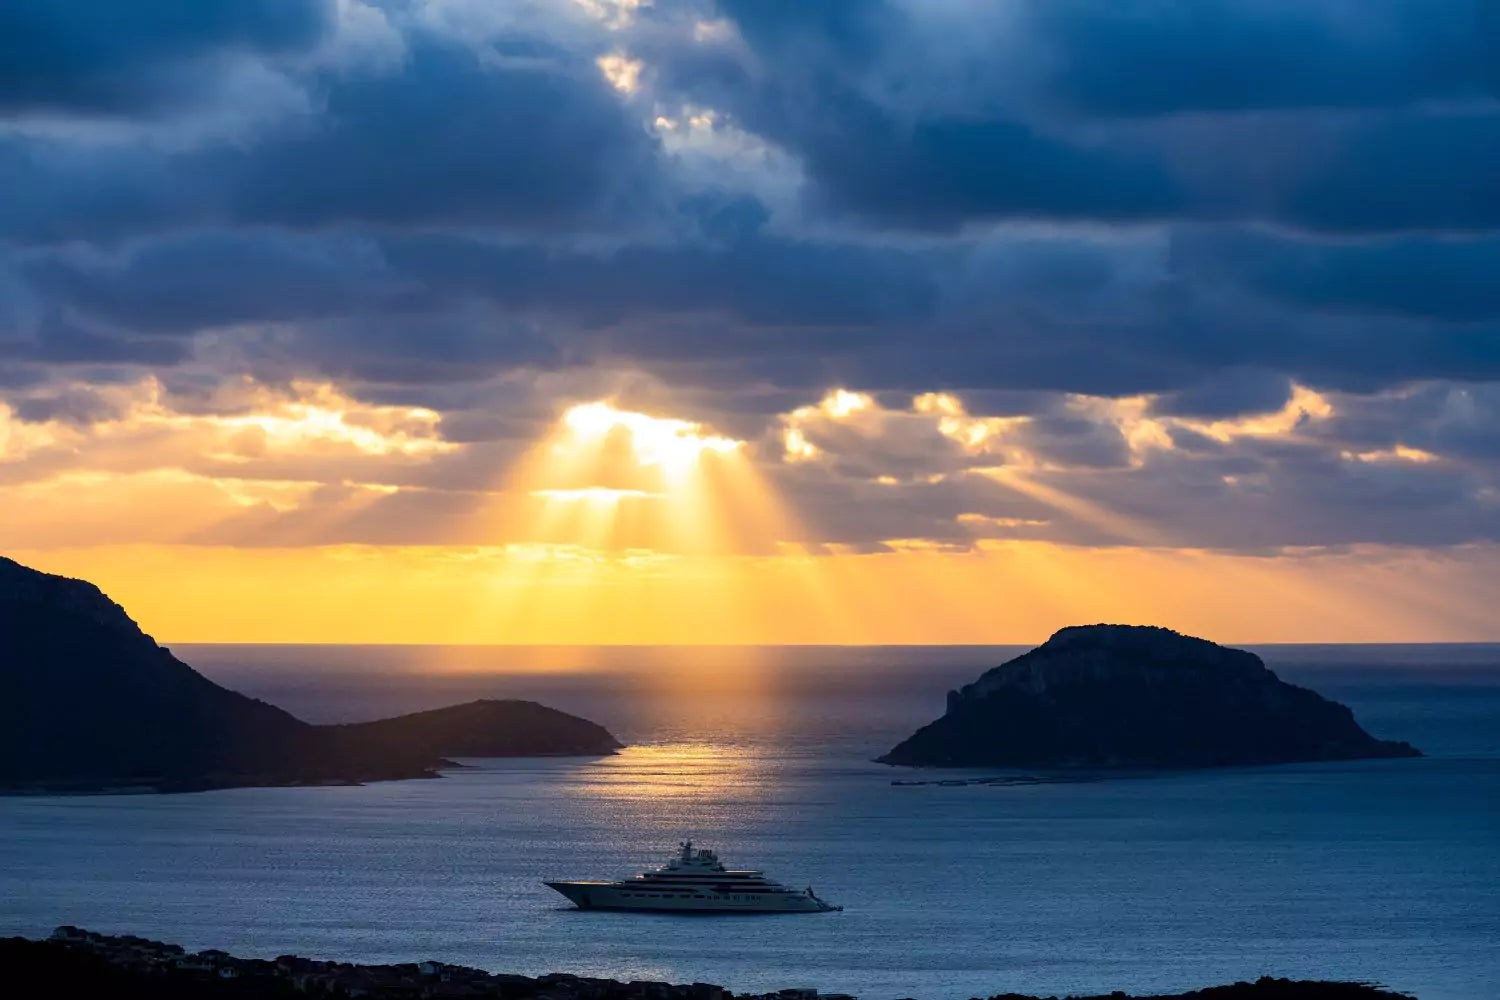 shaft of light above the ship in the sea. Photo by travelwild  on shutterstock